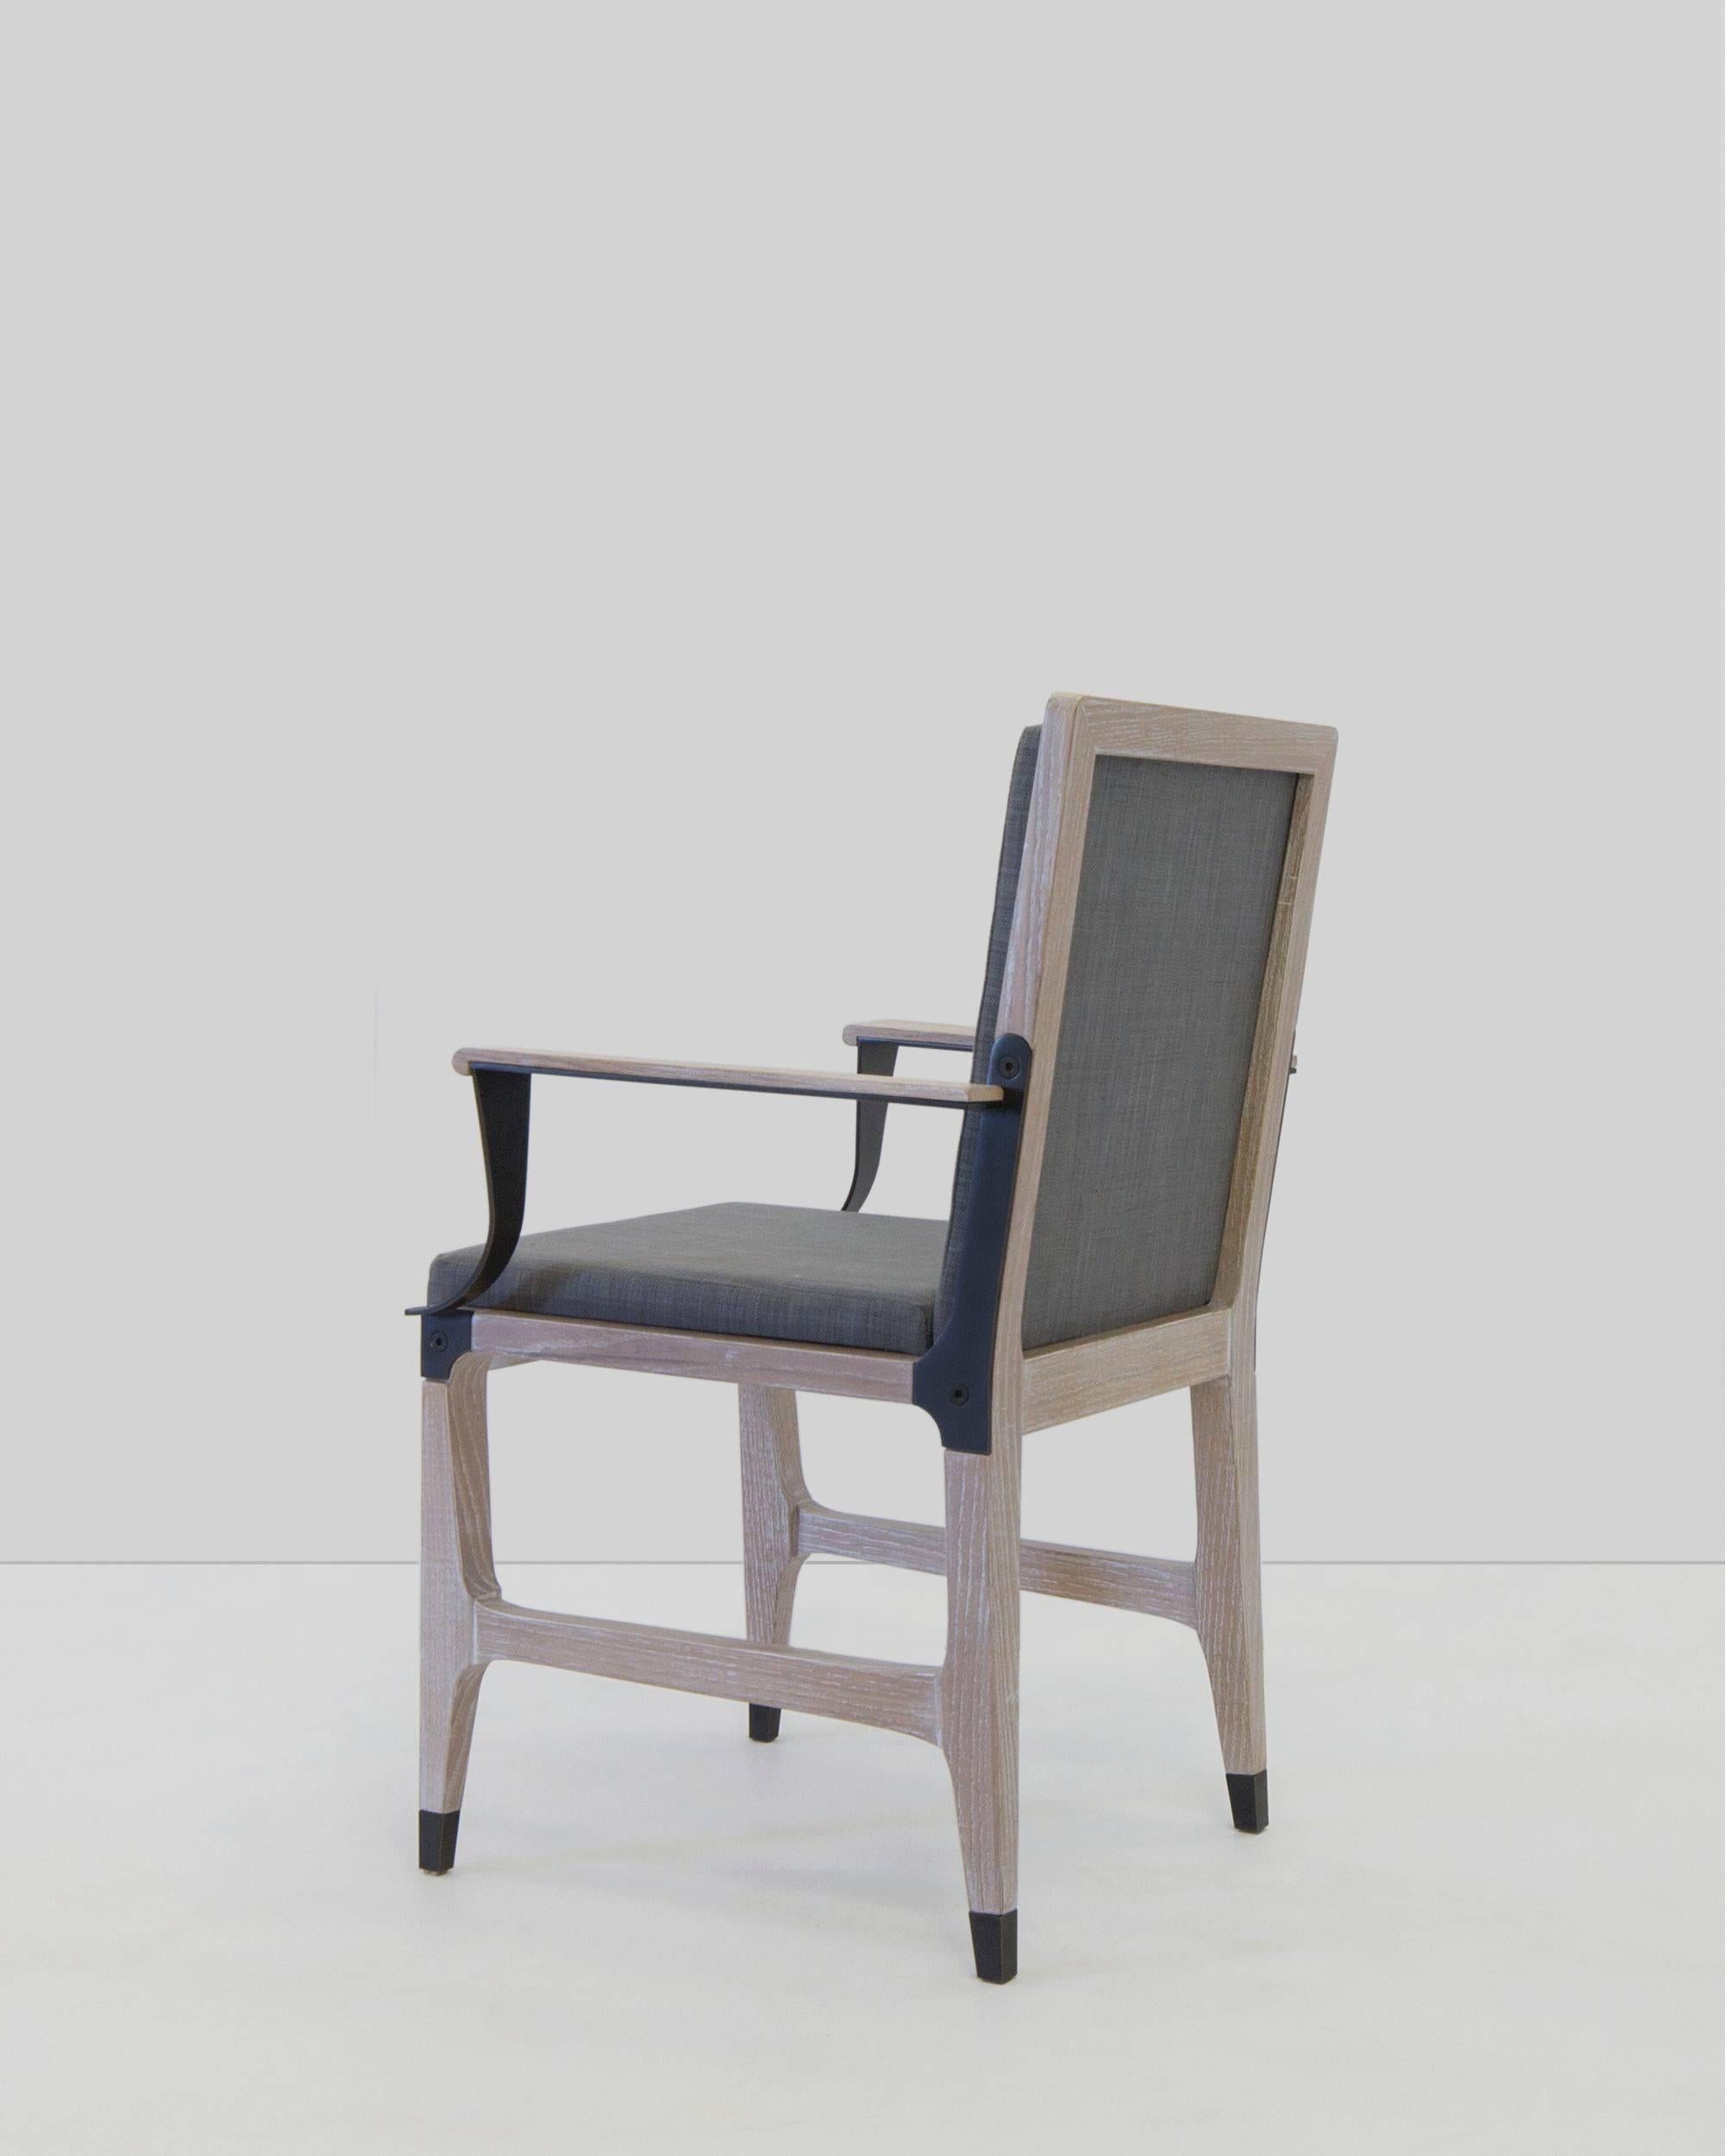 American Mark Zeff, Bronze and Limed Oak Dining Armchair, USA, 2015